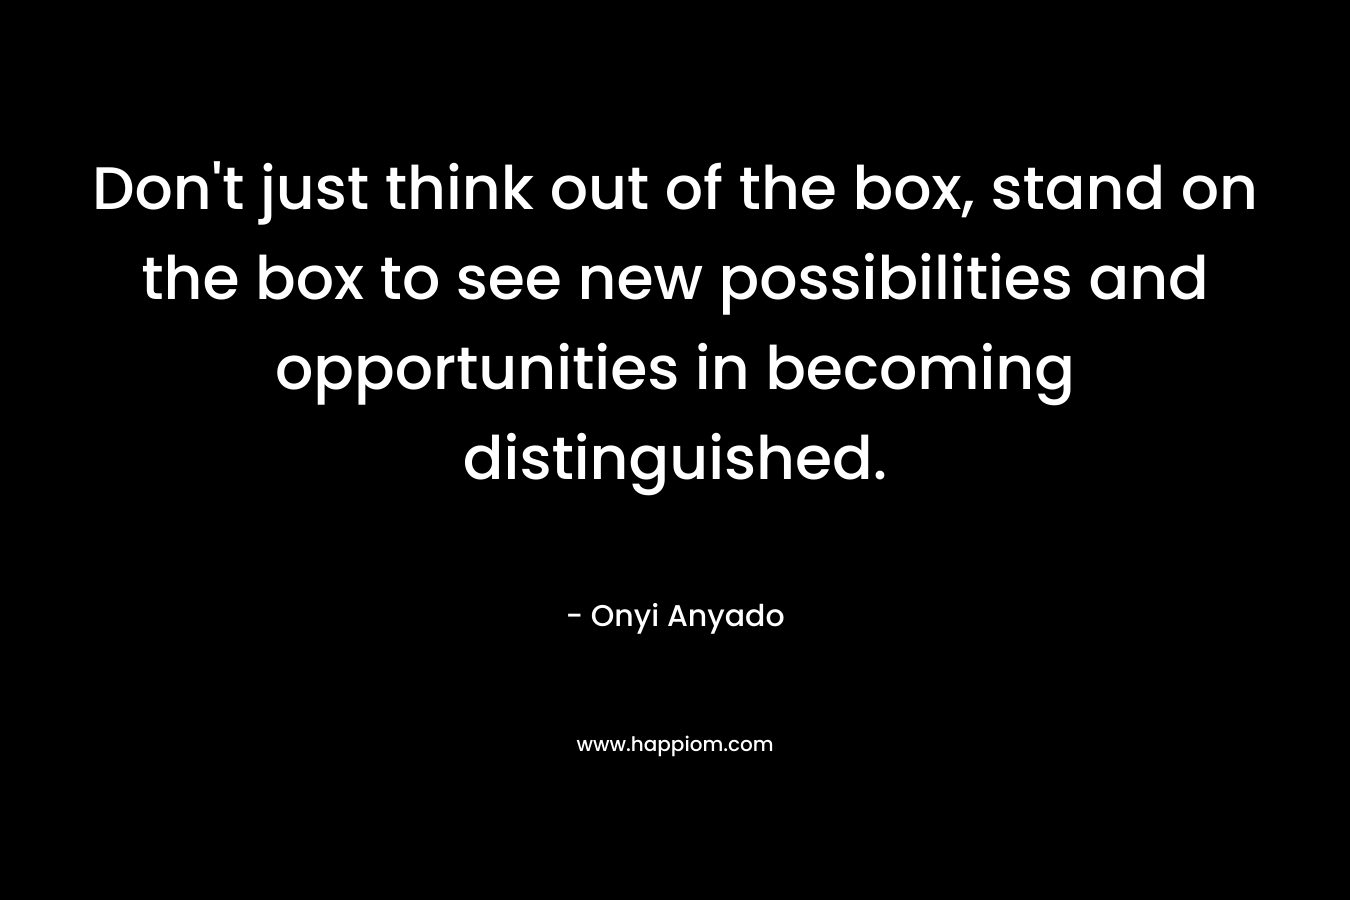 Don't just think out of the box, stand on the box to see new possibilities and opportunities in becoming distinguished.